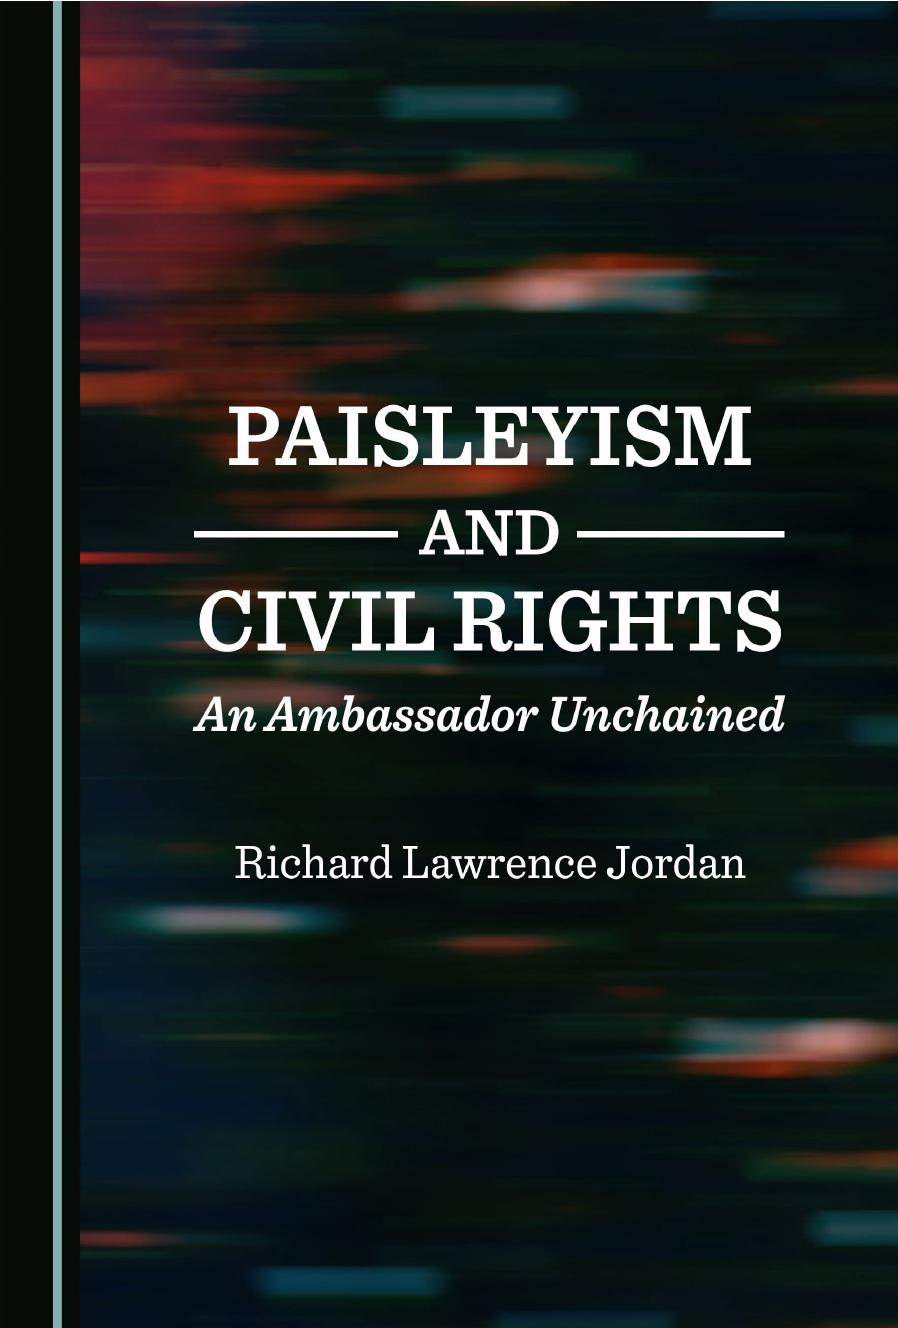 Paisleyism and Civil Rights: An Ambassador Unchained by Richard Lawrence Jordan